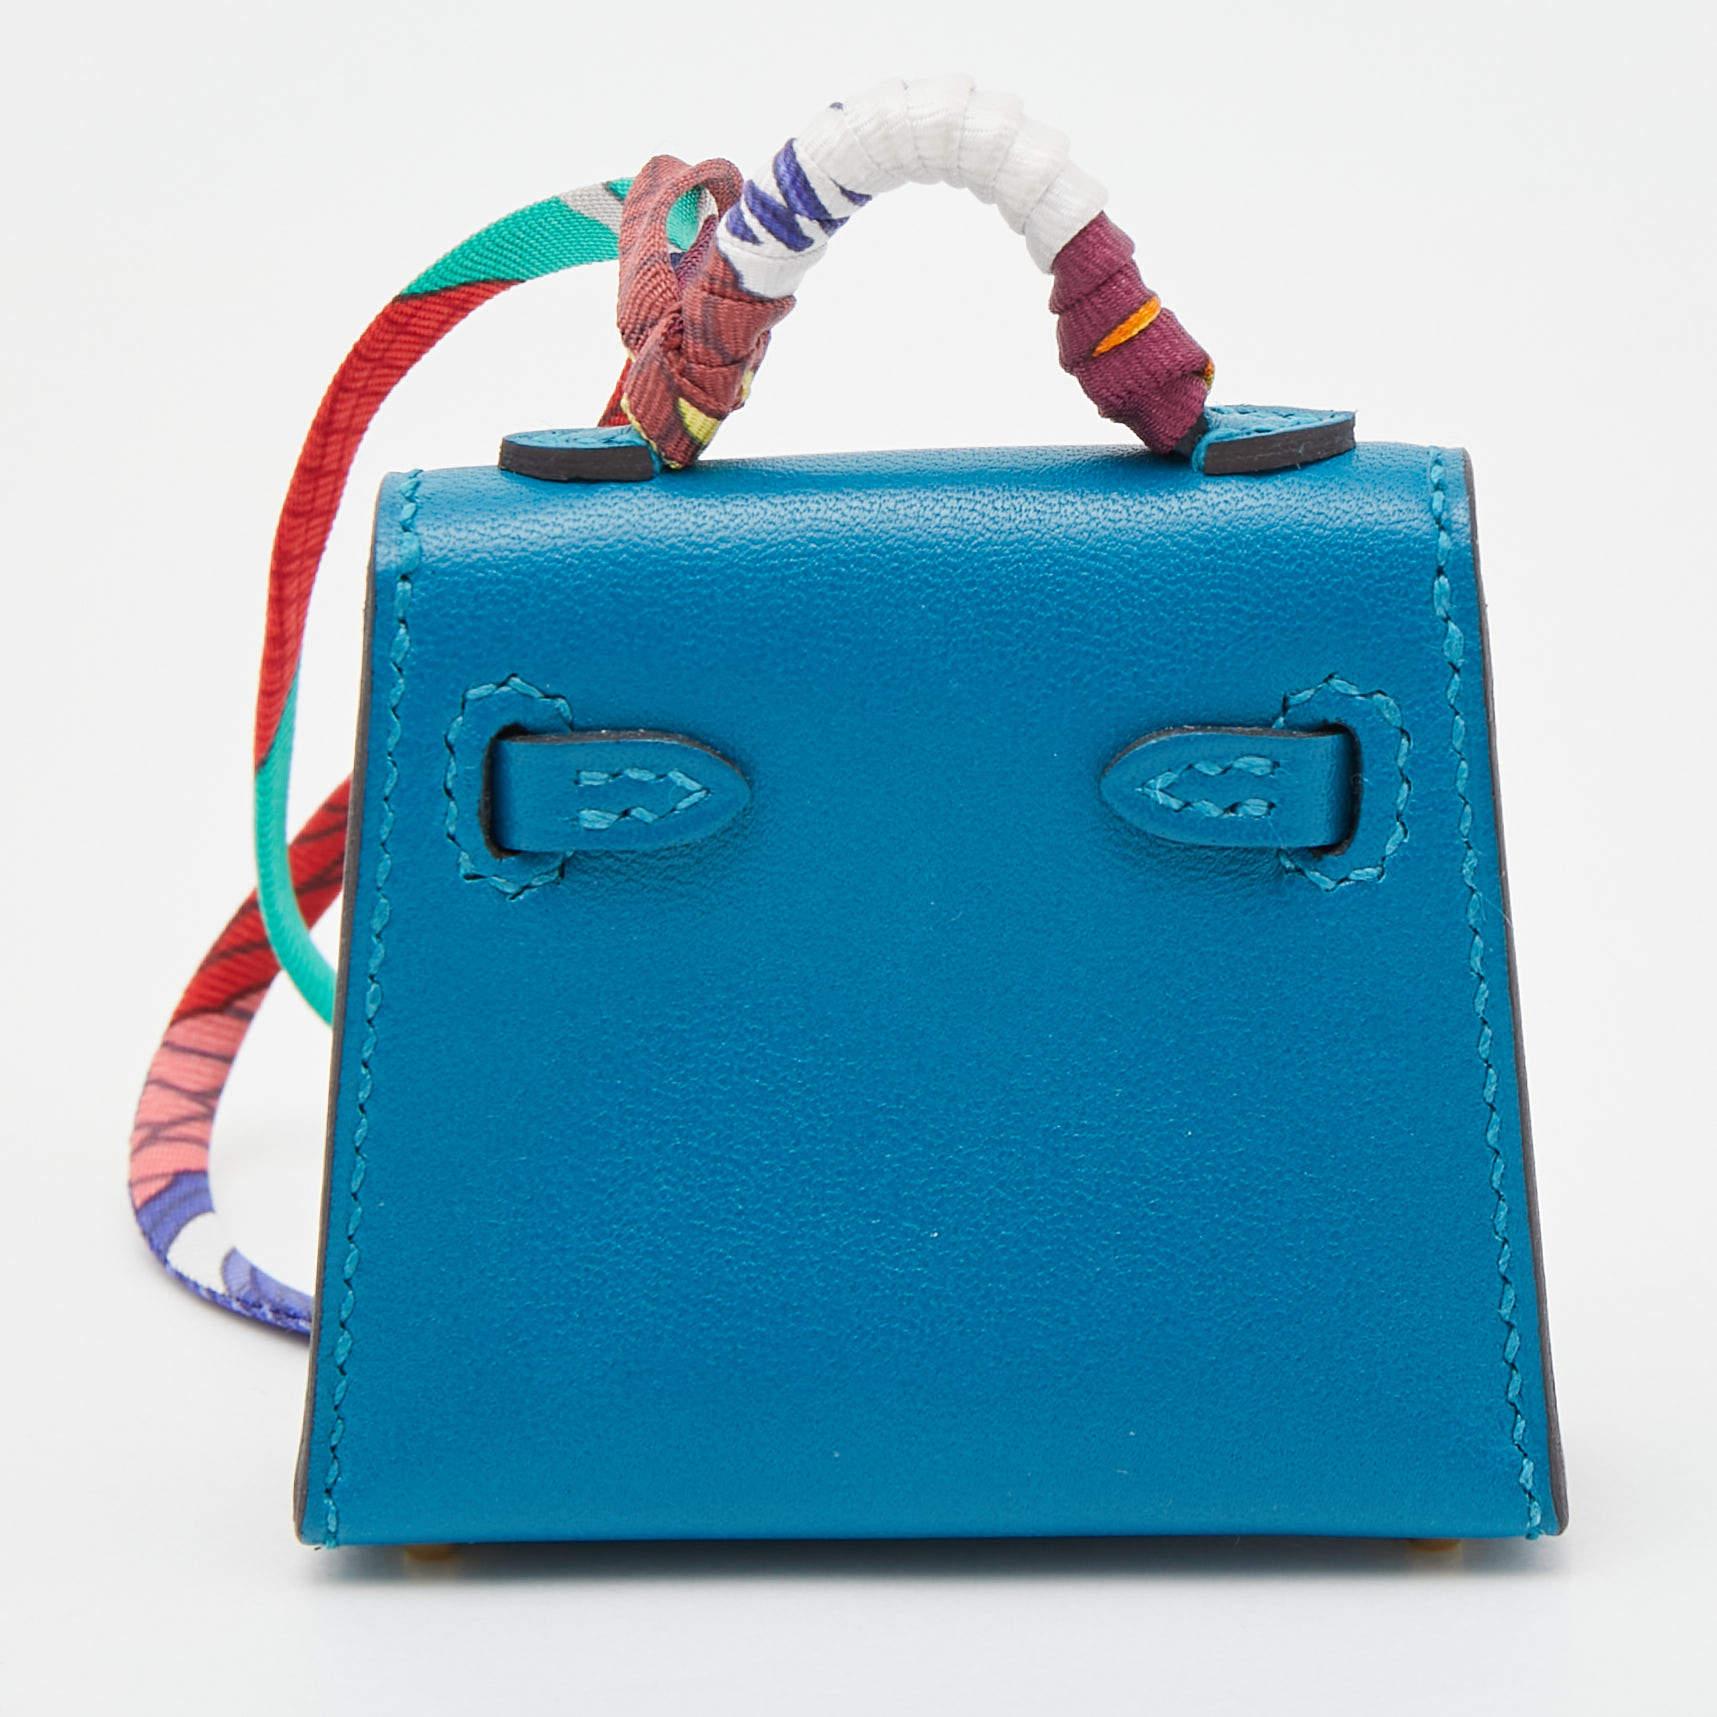 Wondering how to decorate your Kelly bag? Use this mini Kelly twilly bag charm! It is crafted using leather into the structure we love so much. It has the signature handles, and the front lock can be unclasped too.

Includes: Original Dustbag,